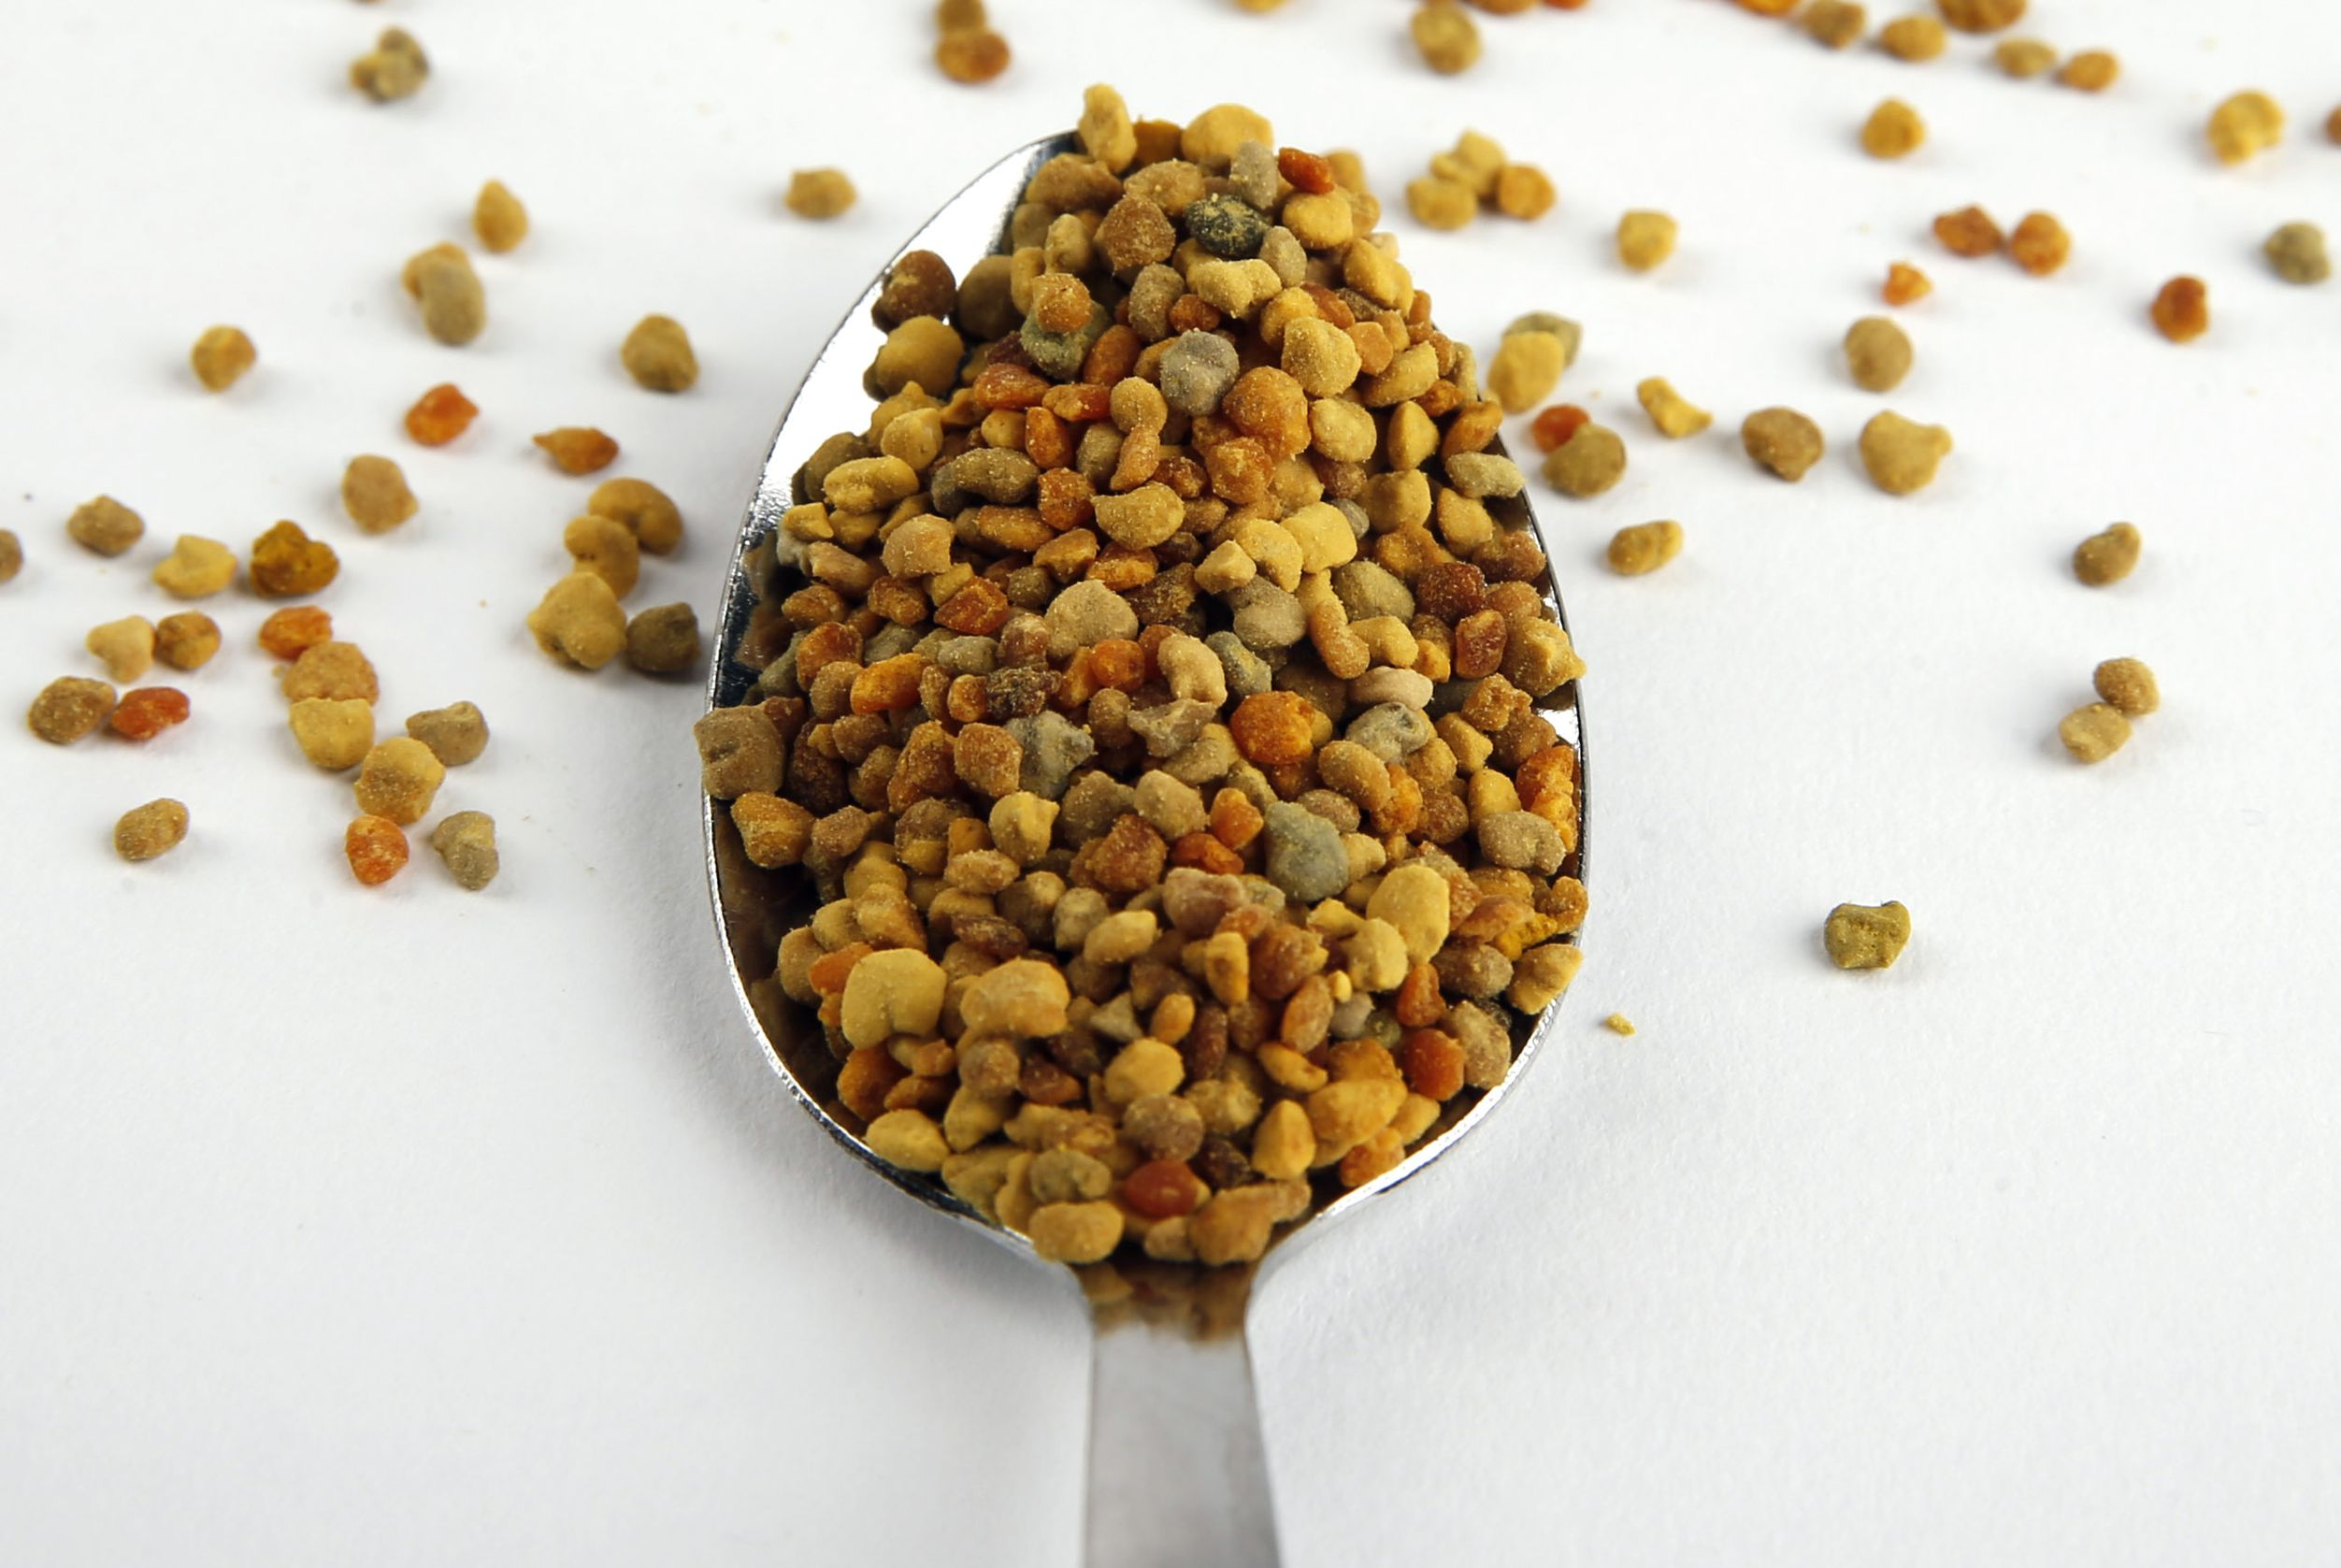 Should you add bee pollen to your smoothies? Here's what you need